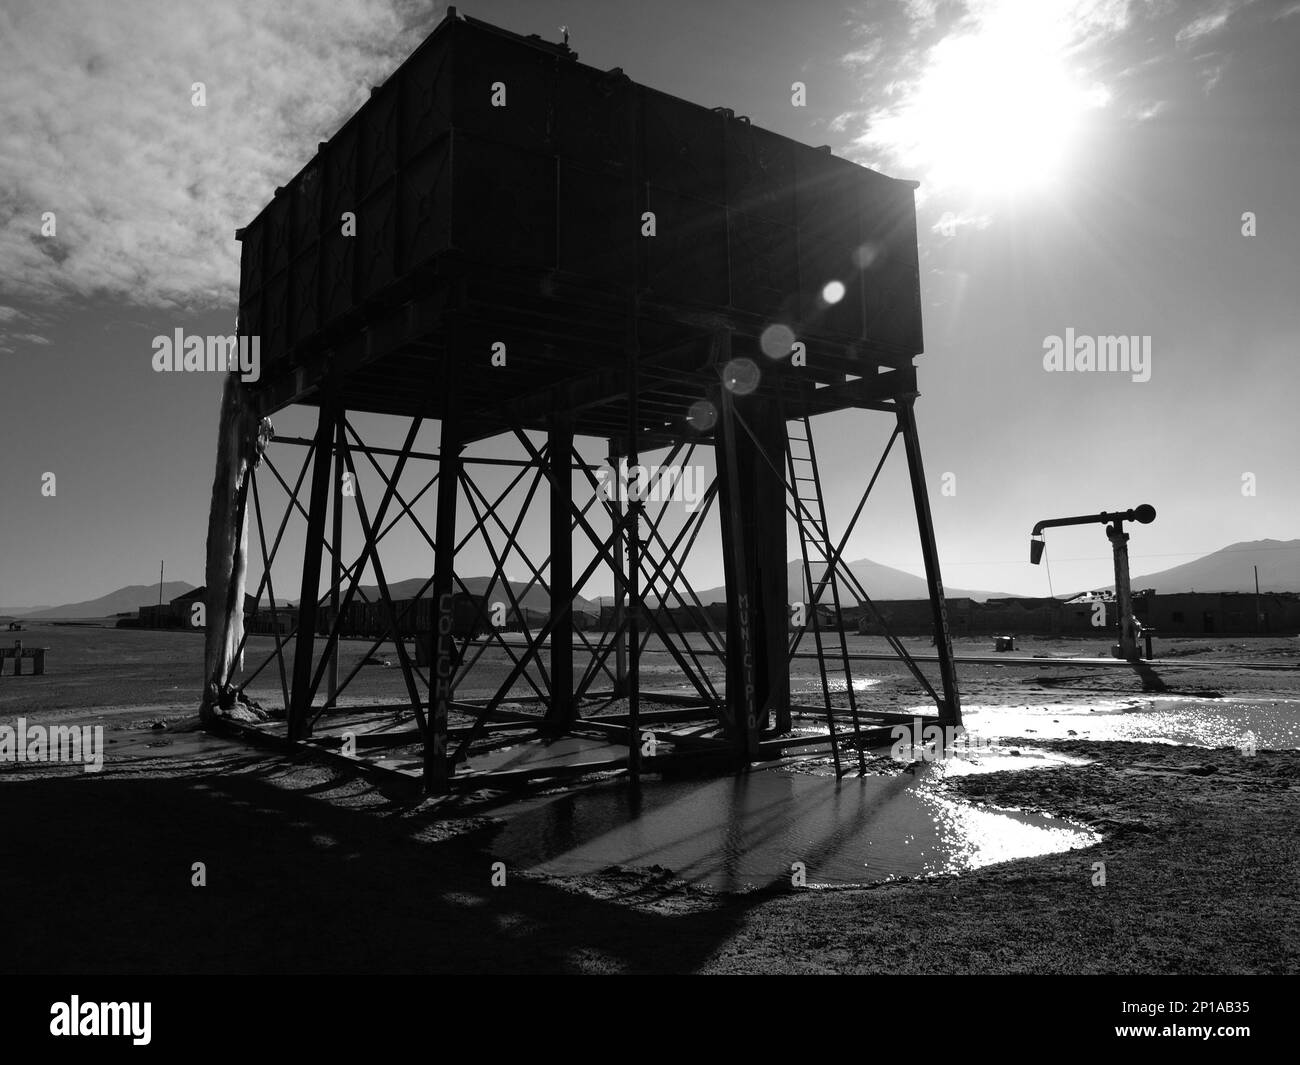 Vintage railroad water tank and pump in sunny day, Bolivia. Black and white image Stock Photo